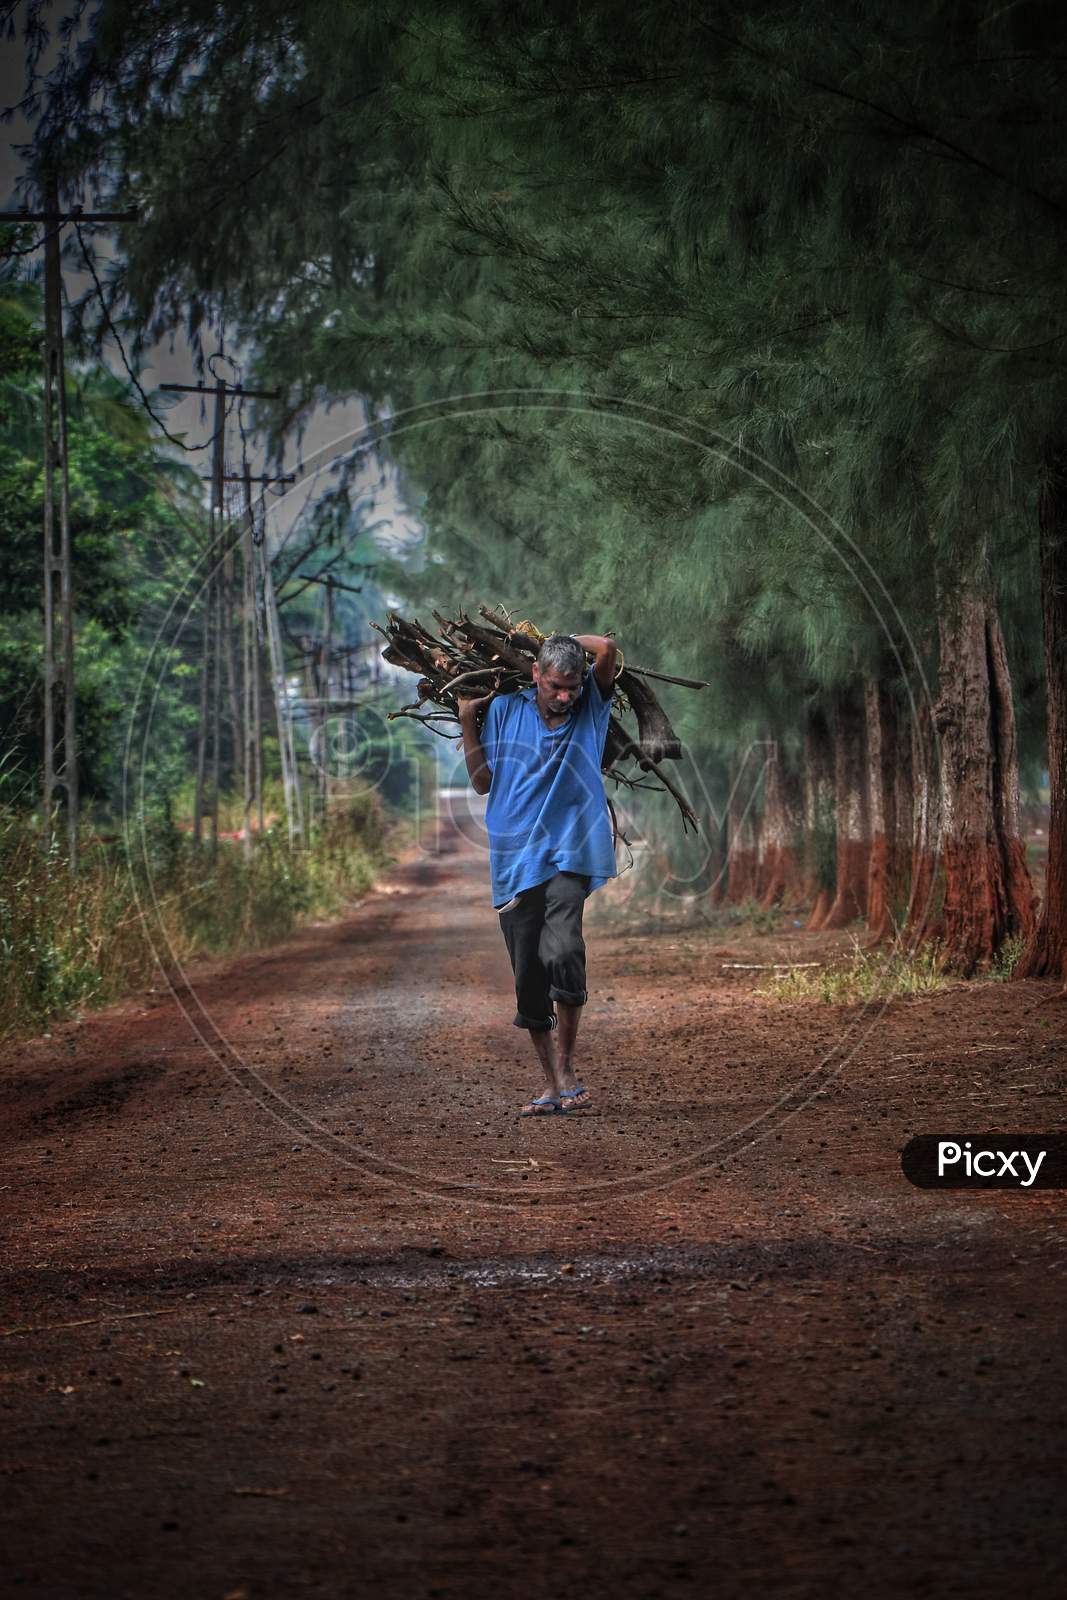 Villager carrying his earning